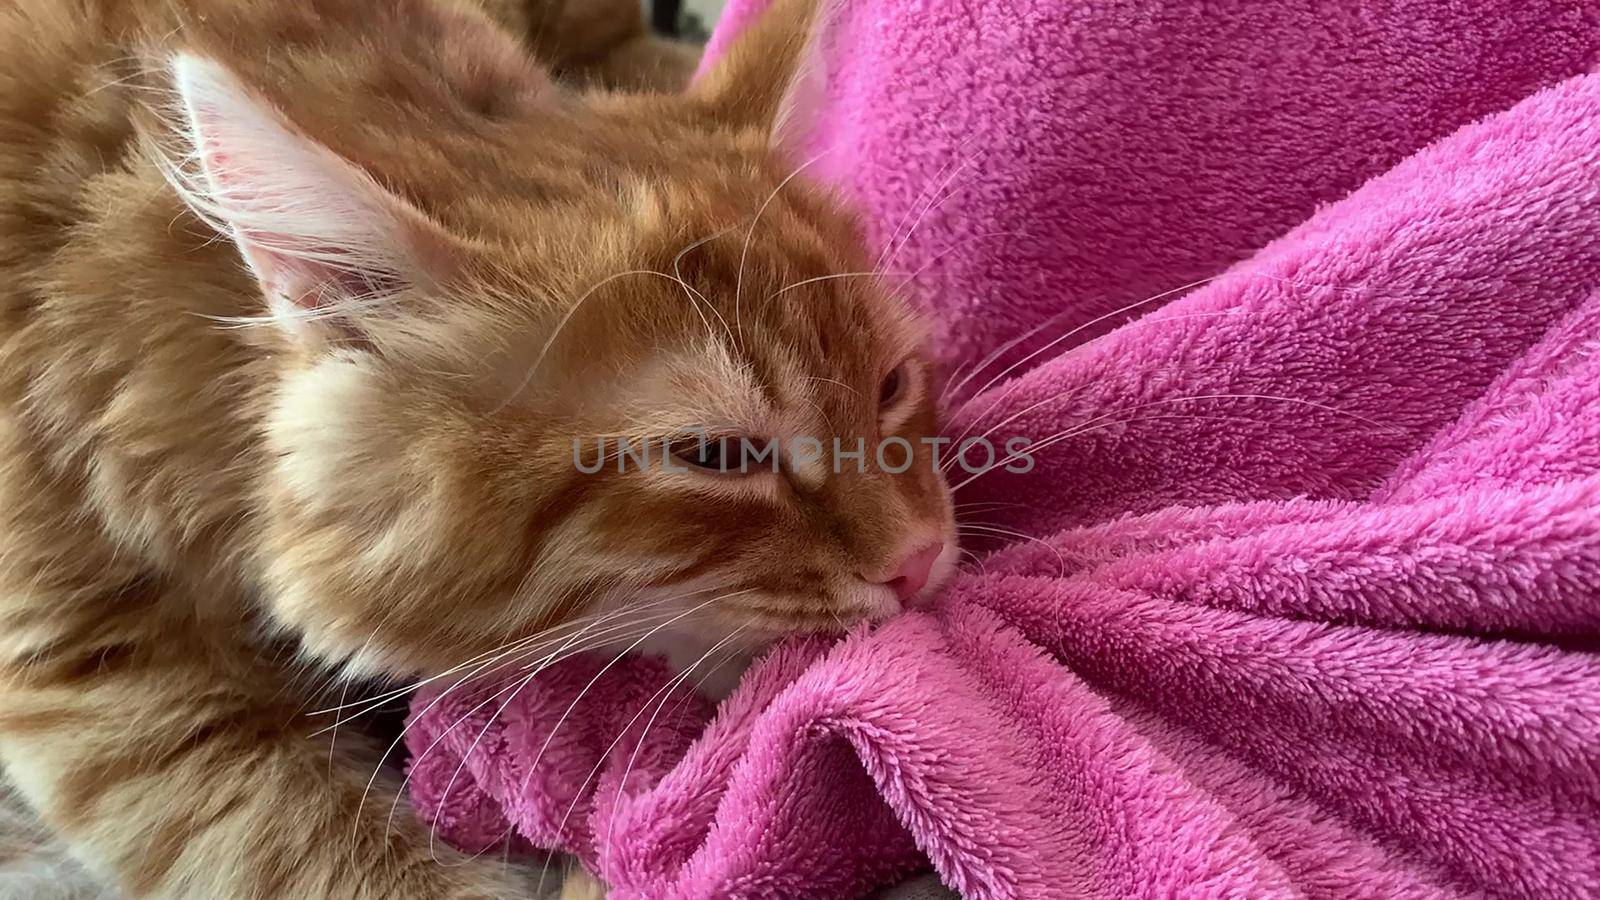 close up of a red kitten pulling a pink terry blanket over itself